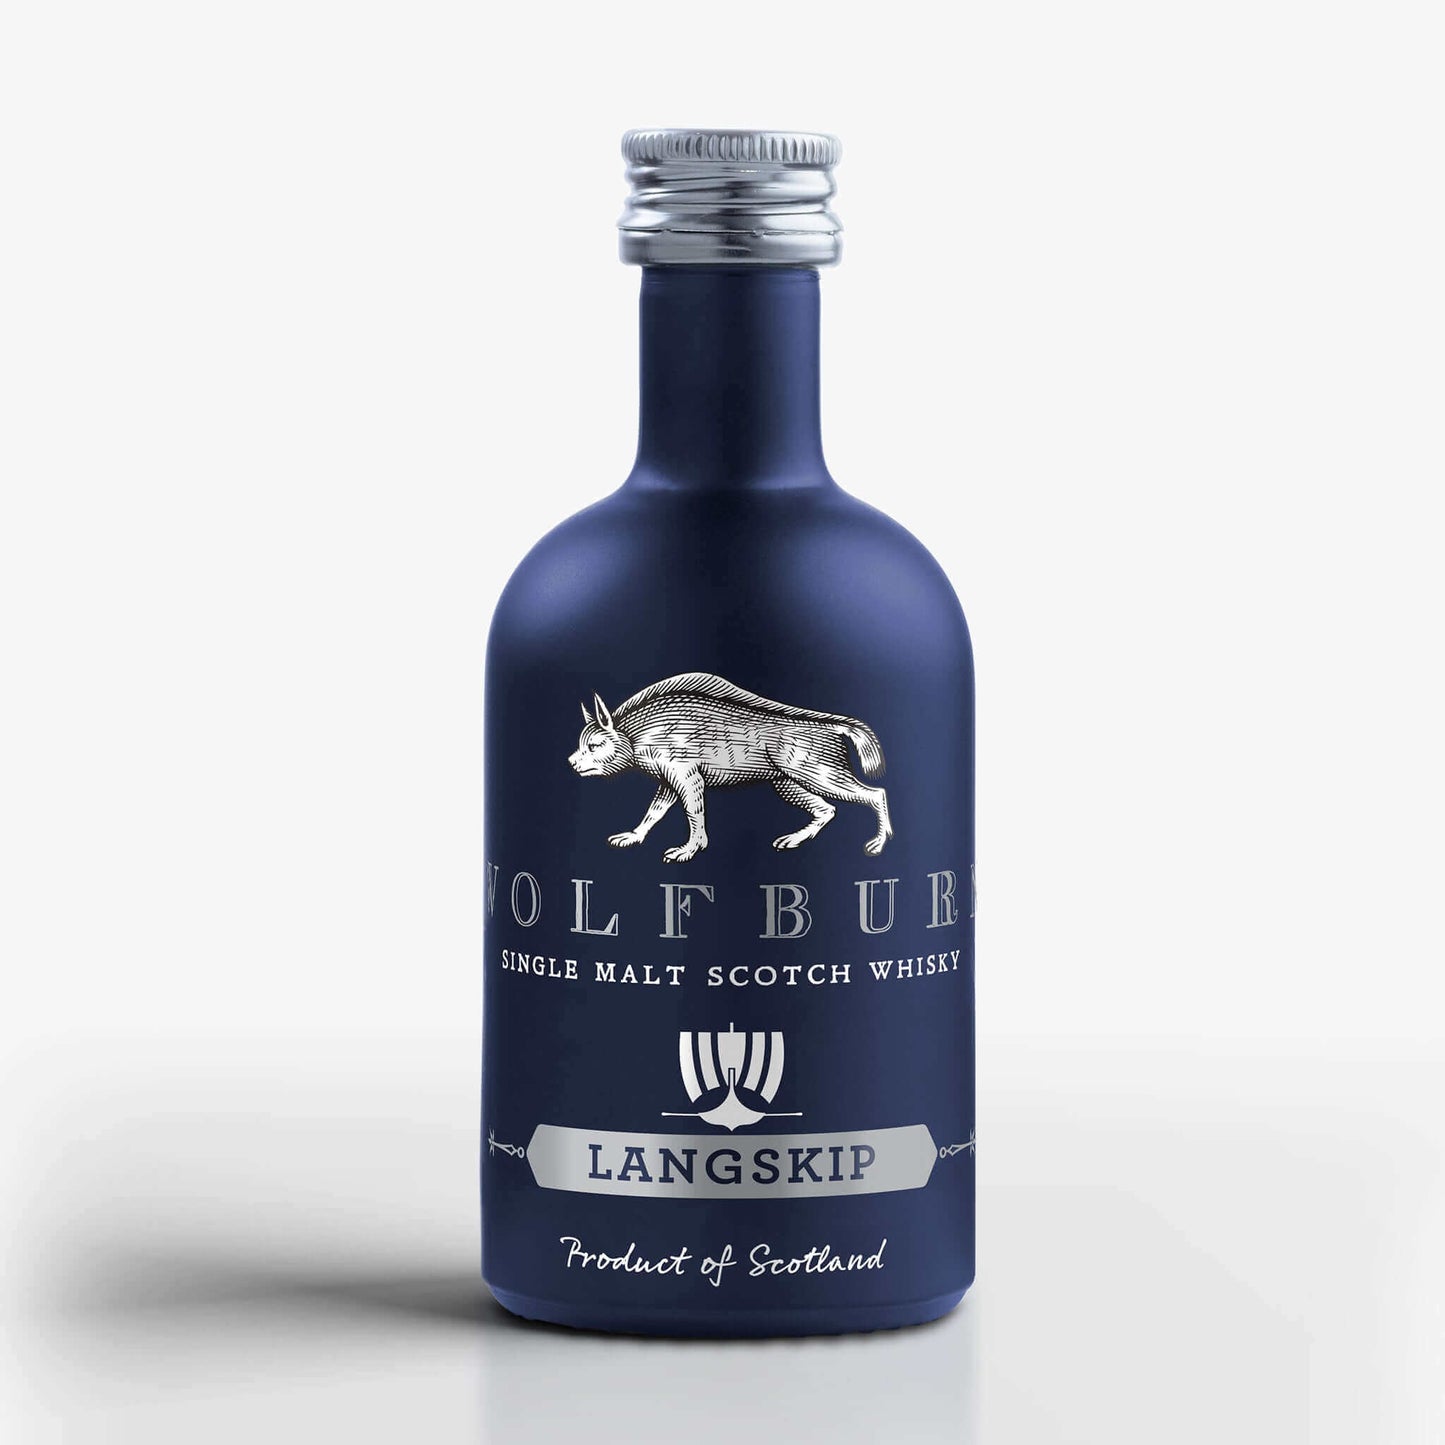 Wolfburn Miniature Quad Pack – 3 x 46% vol. and 1 x 58% vol. 5cl These four conveniently-sized 5cl bottles are a perfect gift for someone special. Or for yourself as a tasting treat, featuring the four core expressions of Wolfburn.